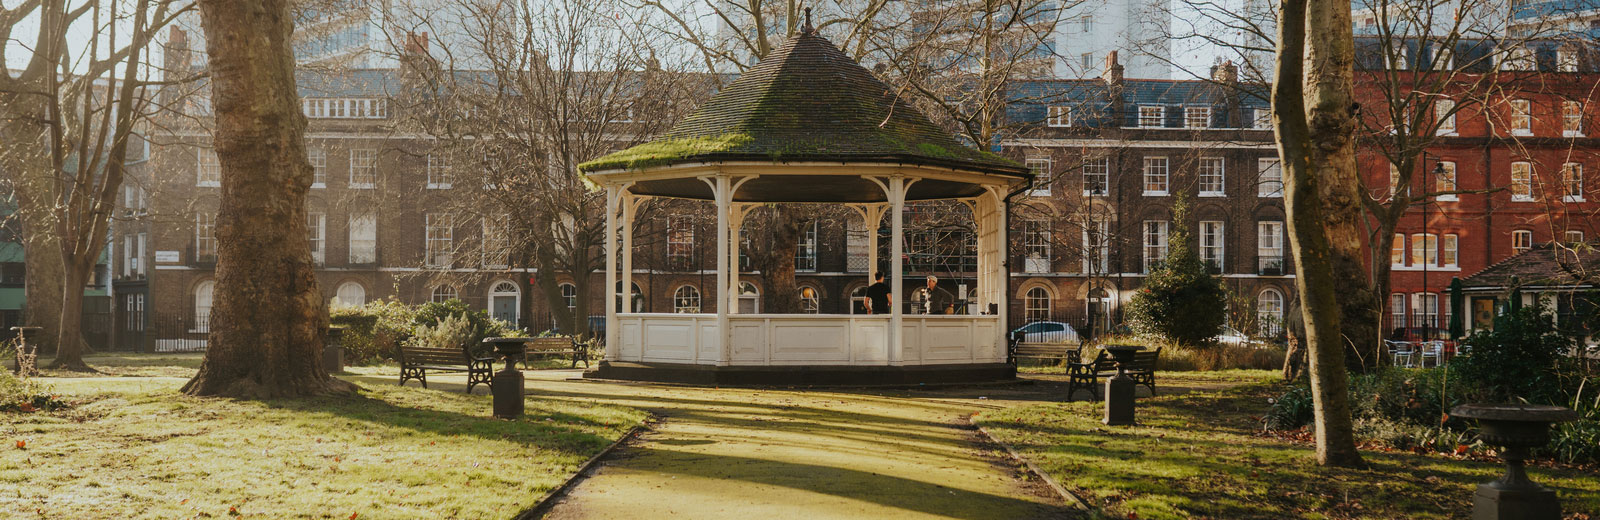 Image of the bandstand on Northampton Square on a sunny, frosty day